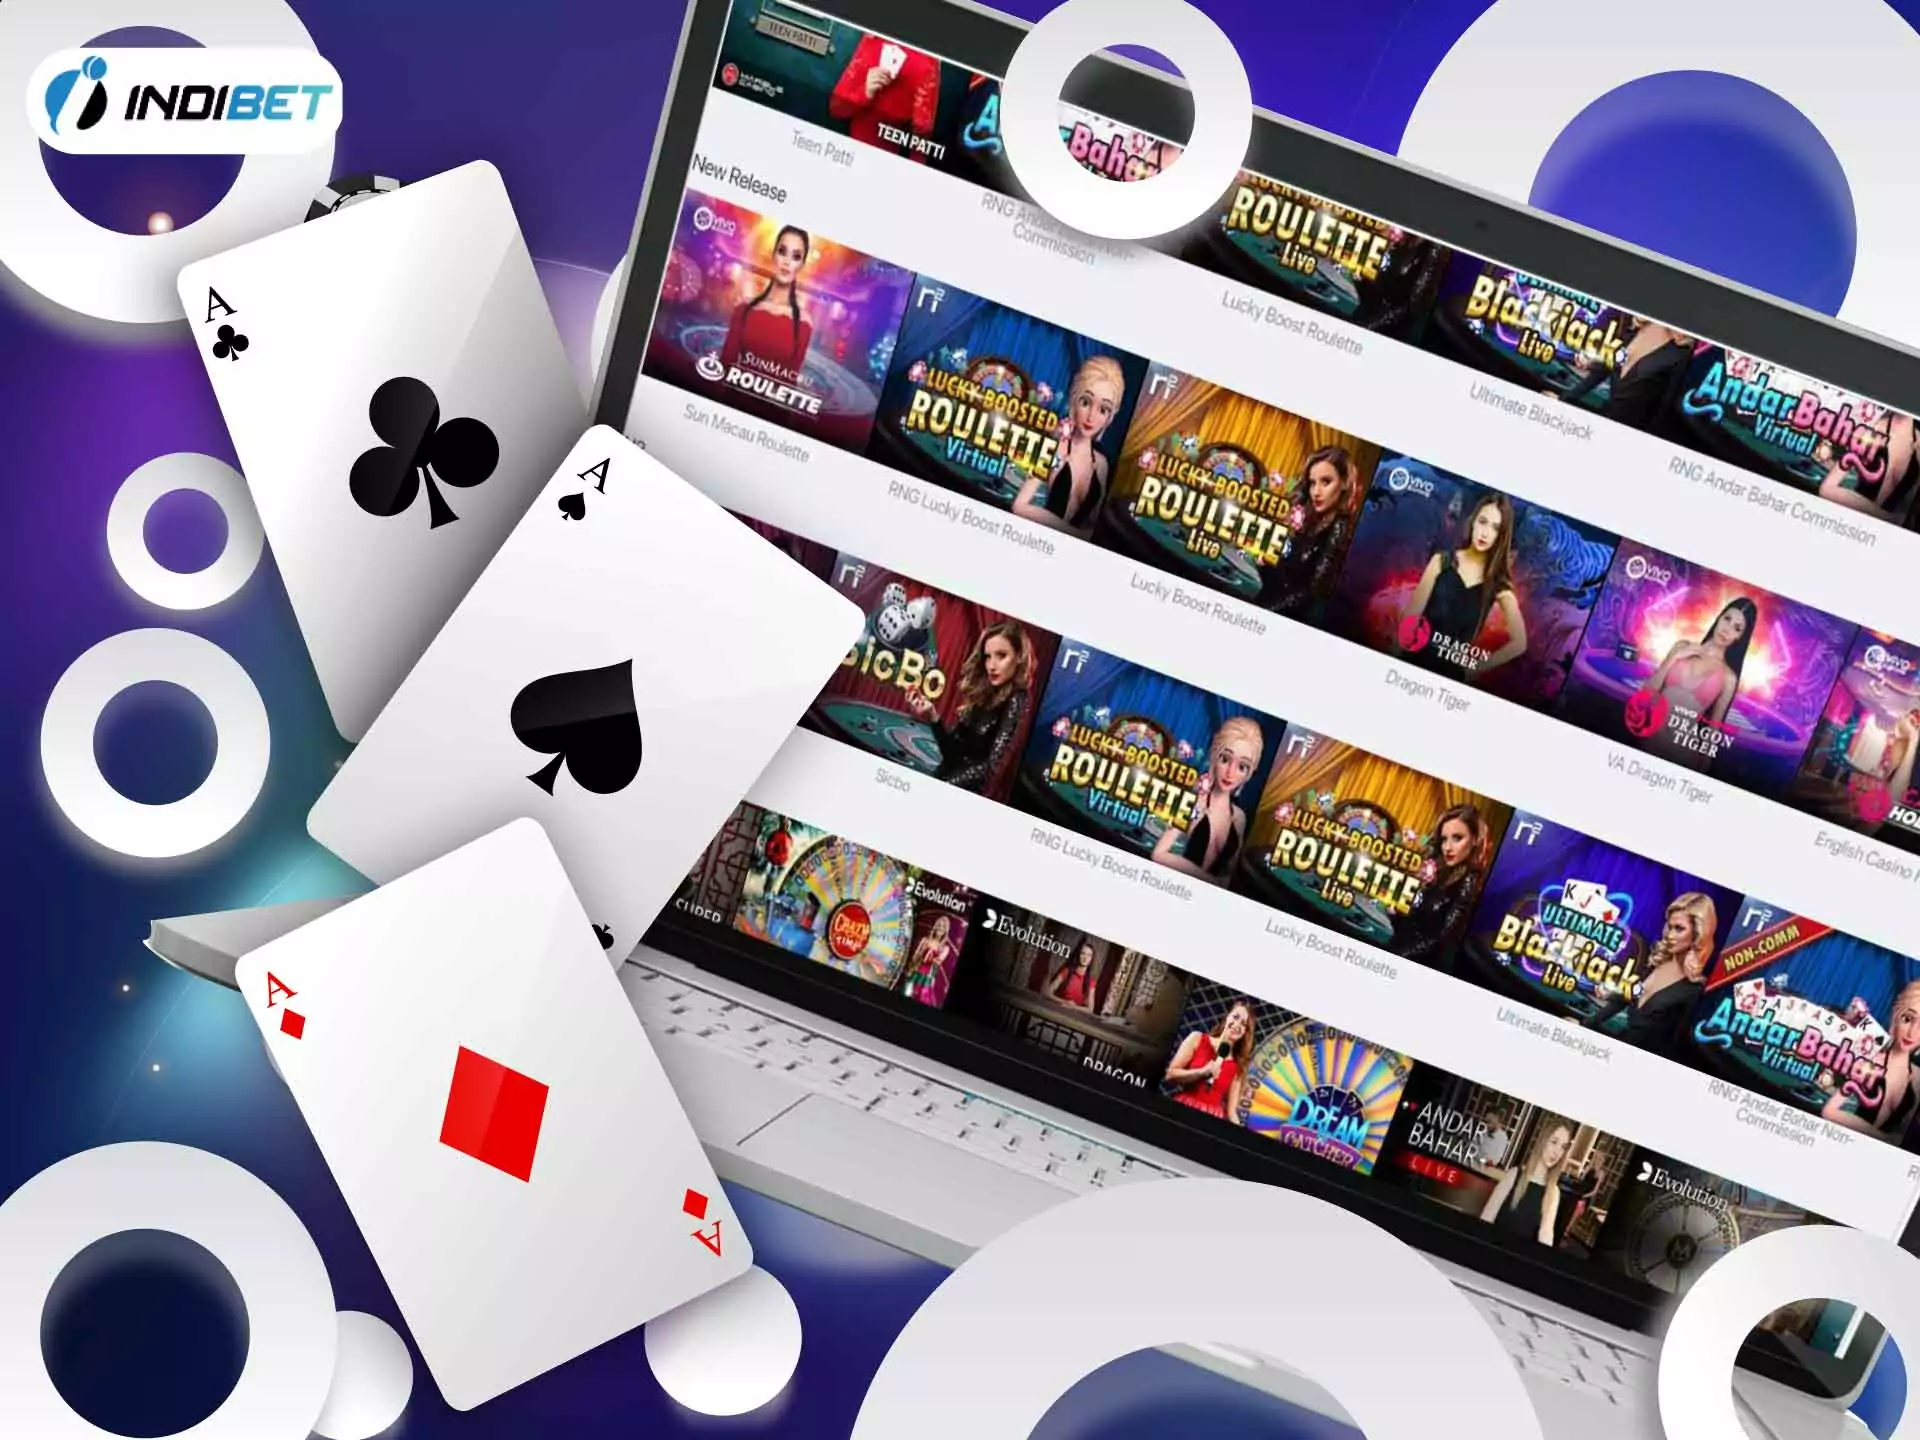 The Indibet casino also offers online Teen Patti games.